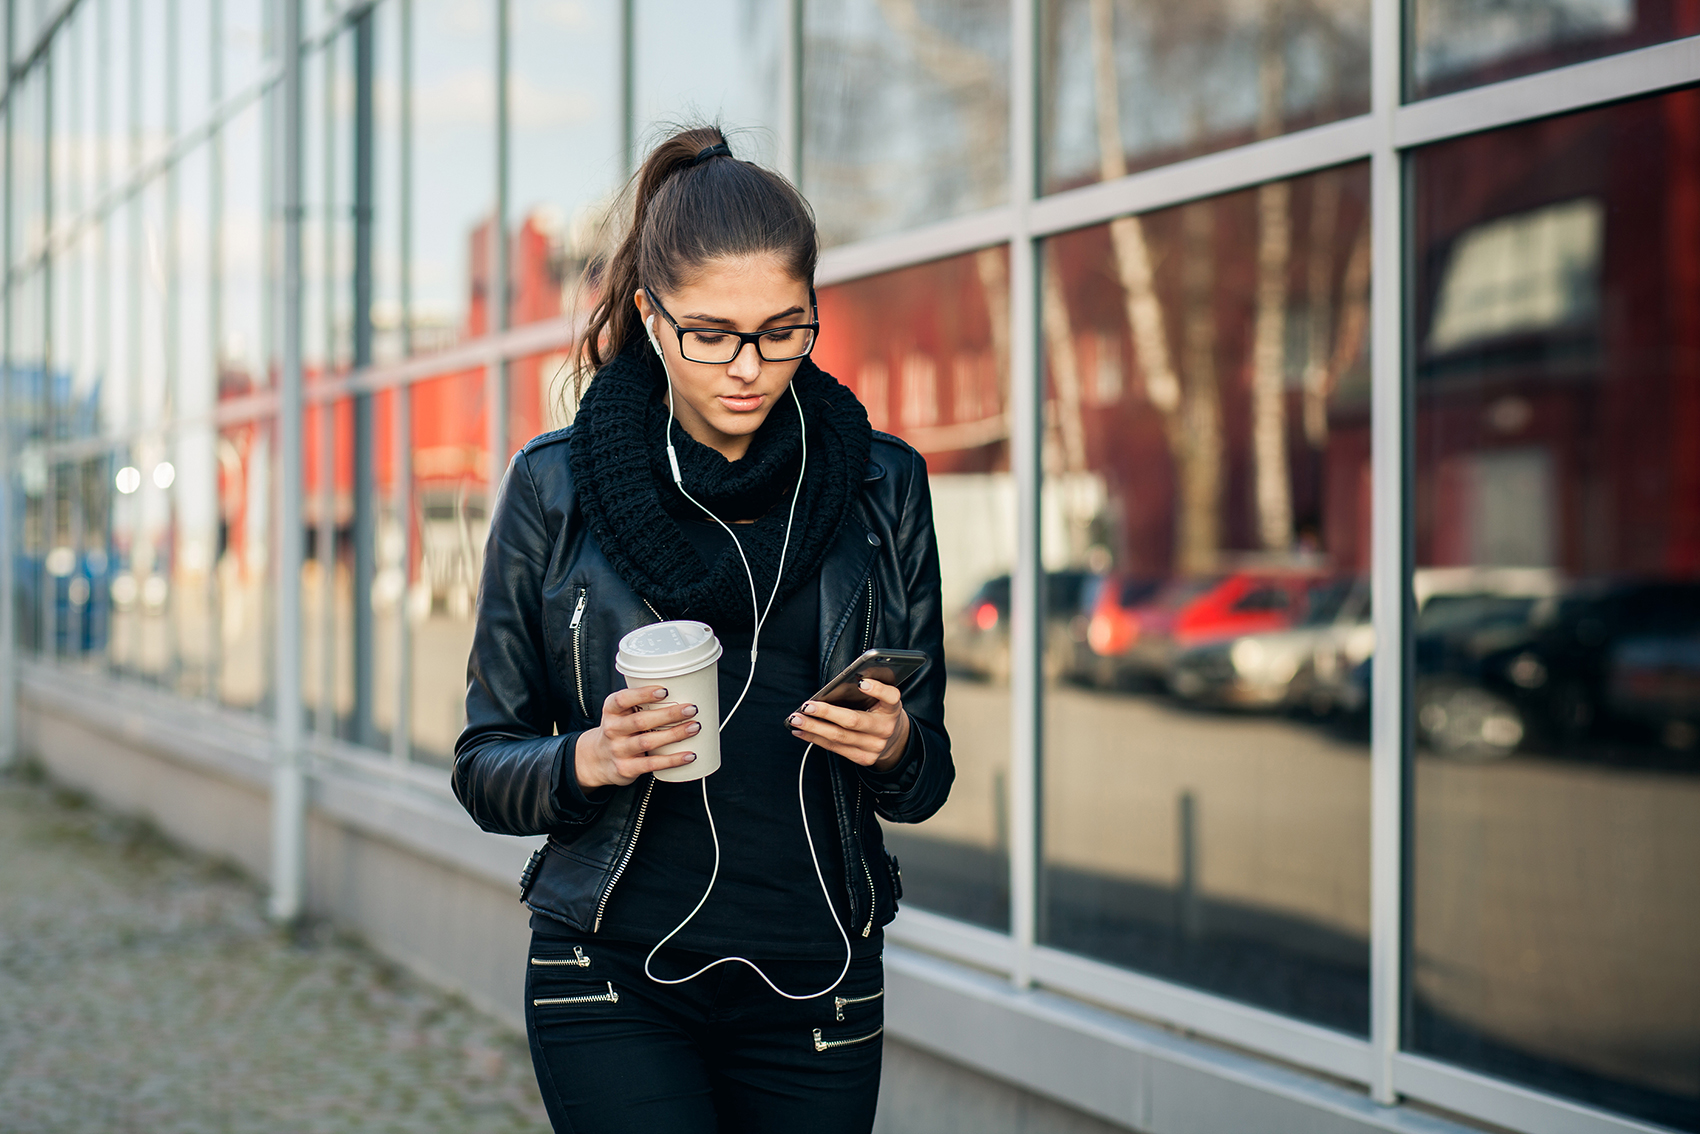 Woman in headphones walking down the street looking at phone and holding coffee